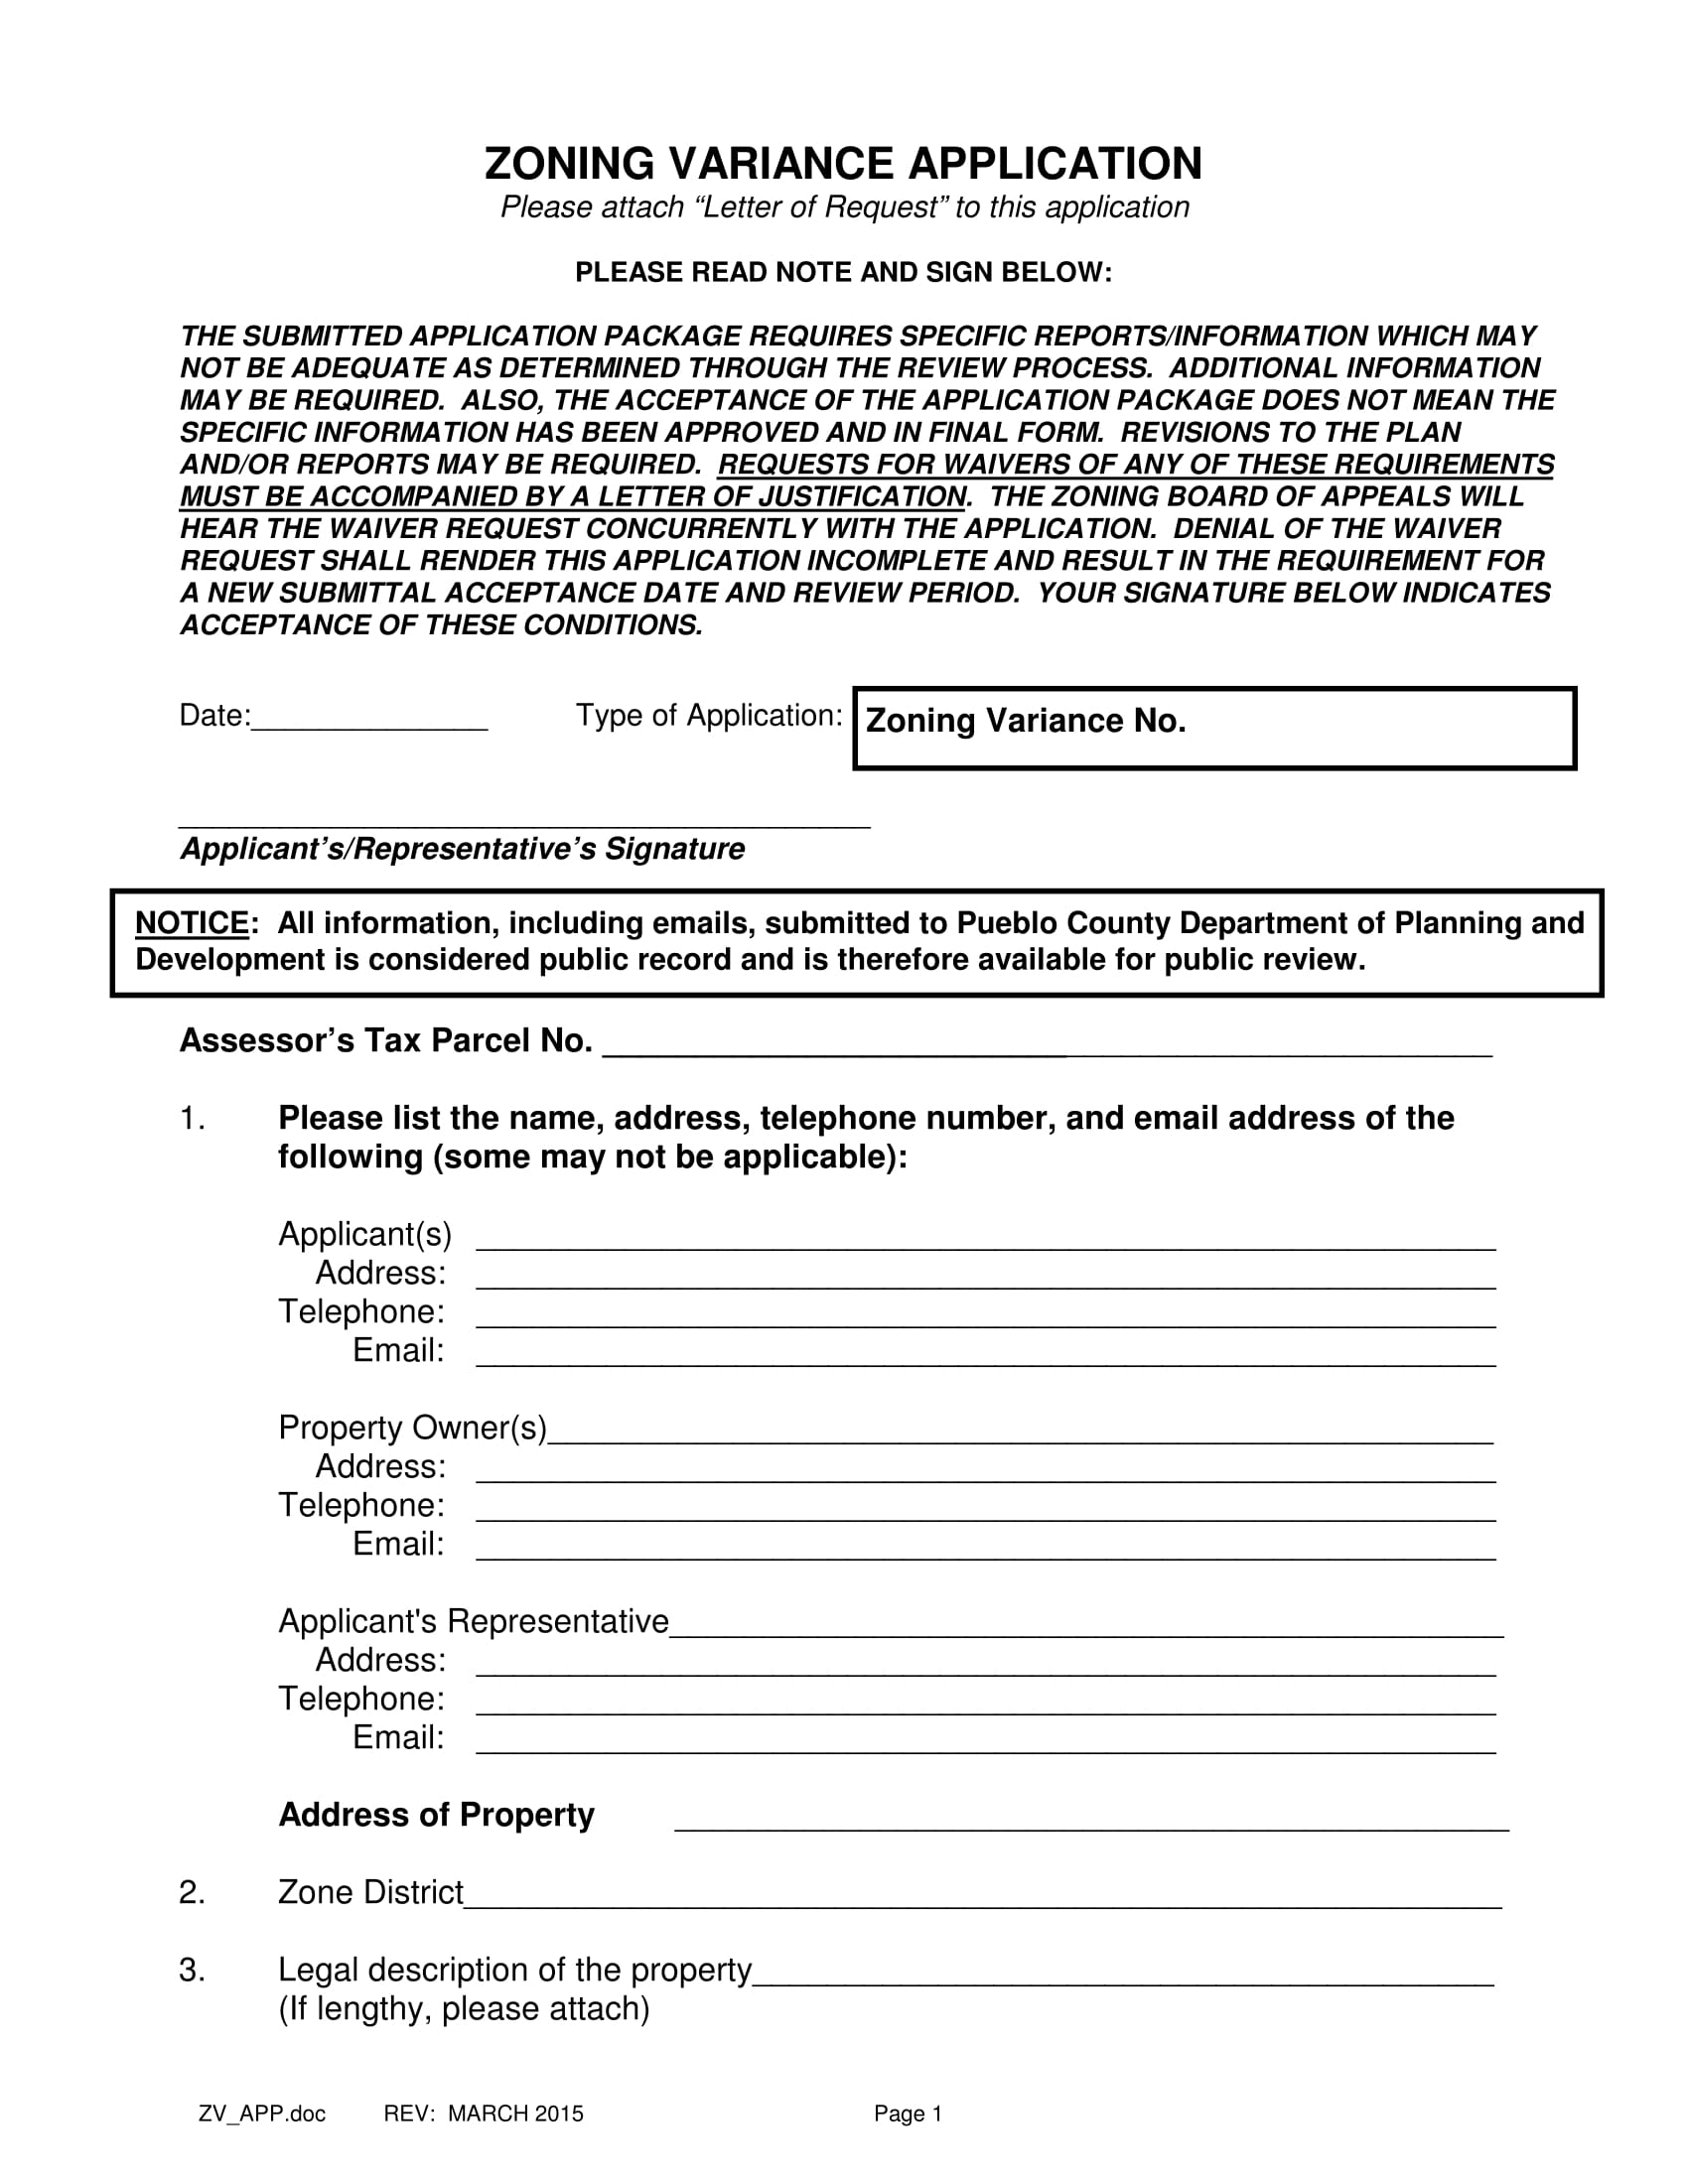 zoning variance application form 1